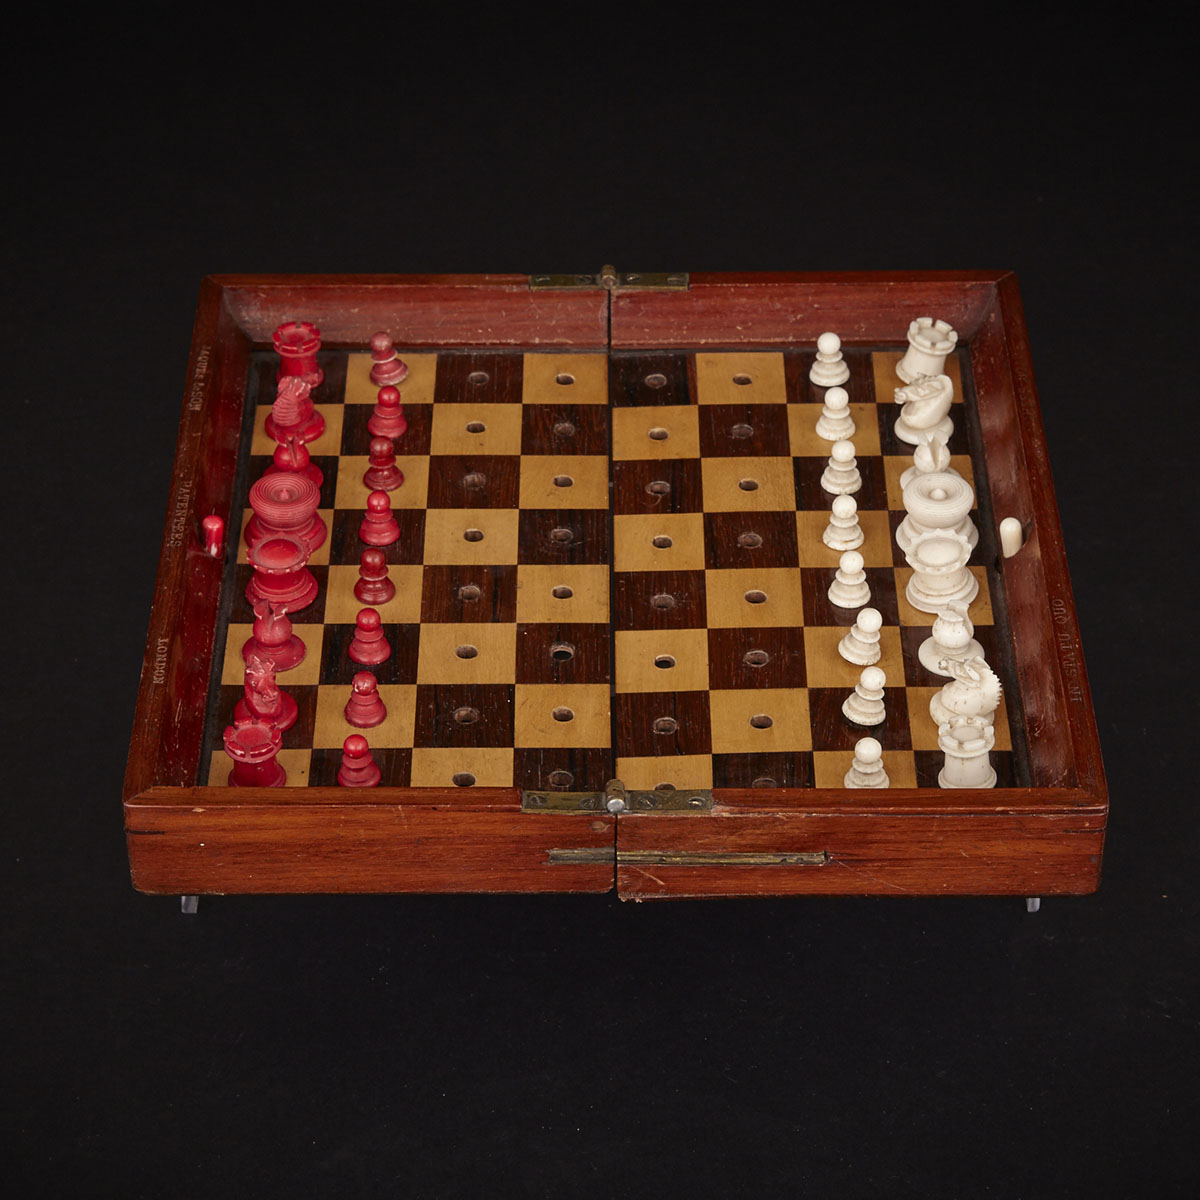 Jaques & Son Patent ‘In Statu Quo’ Travelling Chess Set, London, 19th century